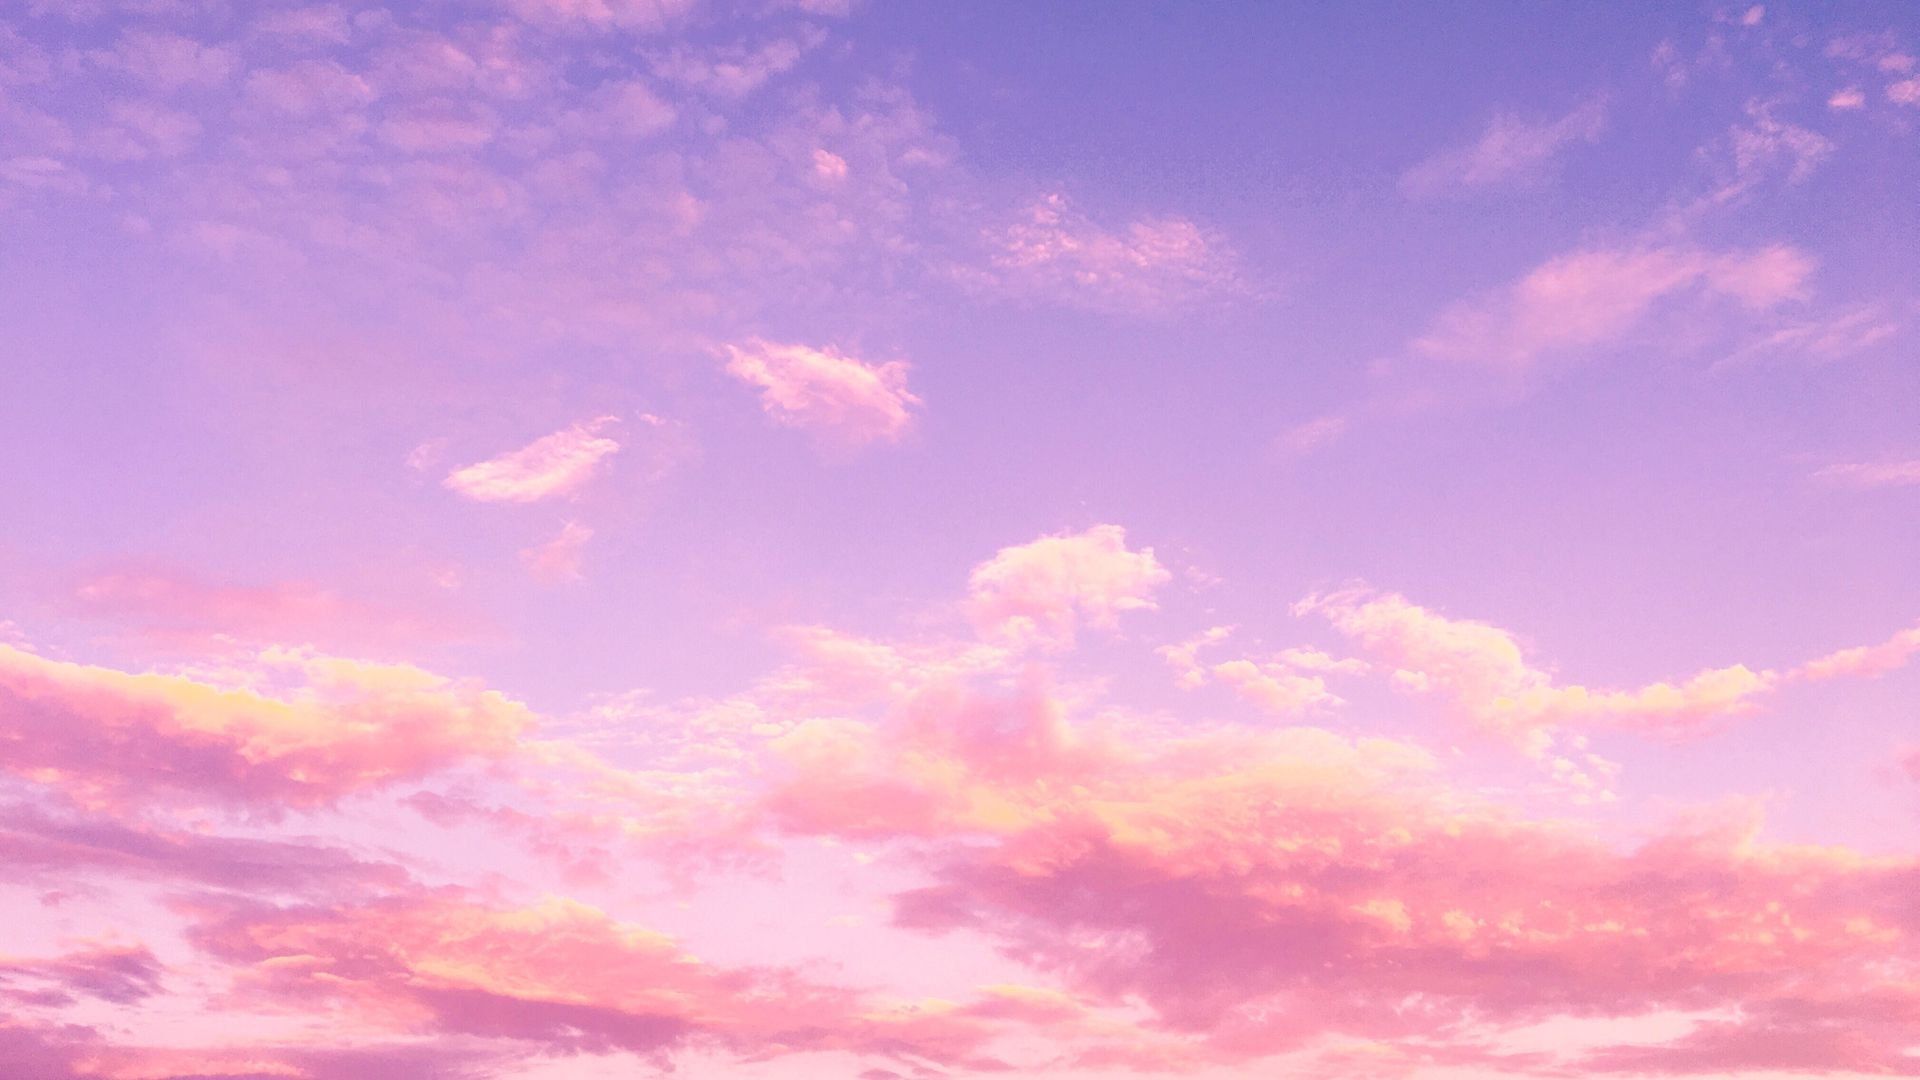 Aesthetic Anime Sky Pink Wallpapers - Wallpaper Cave.